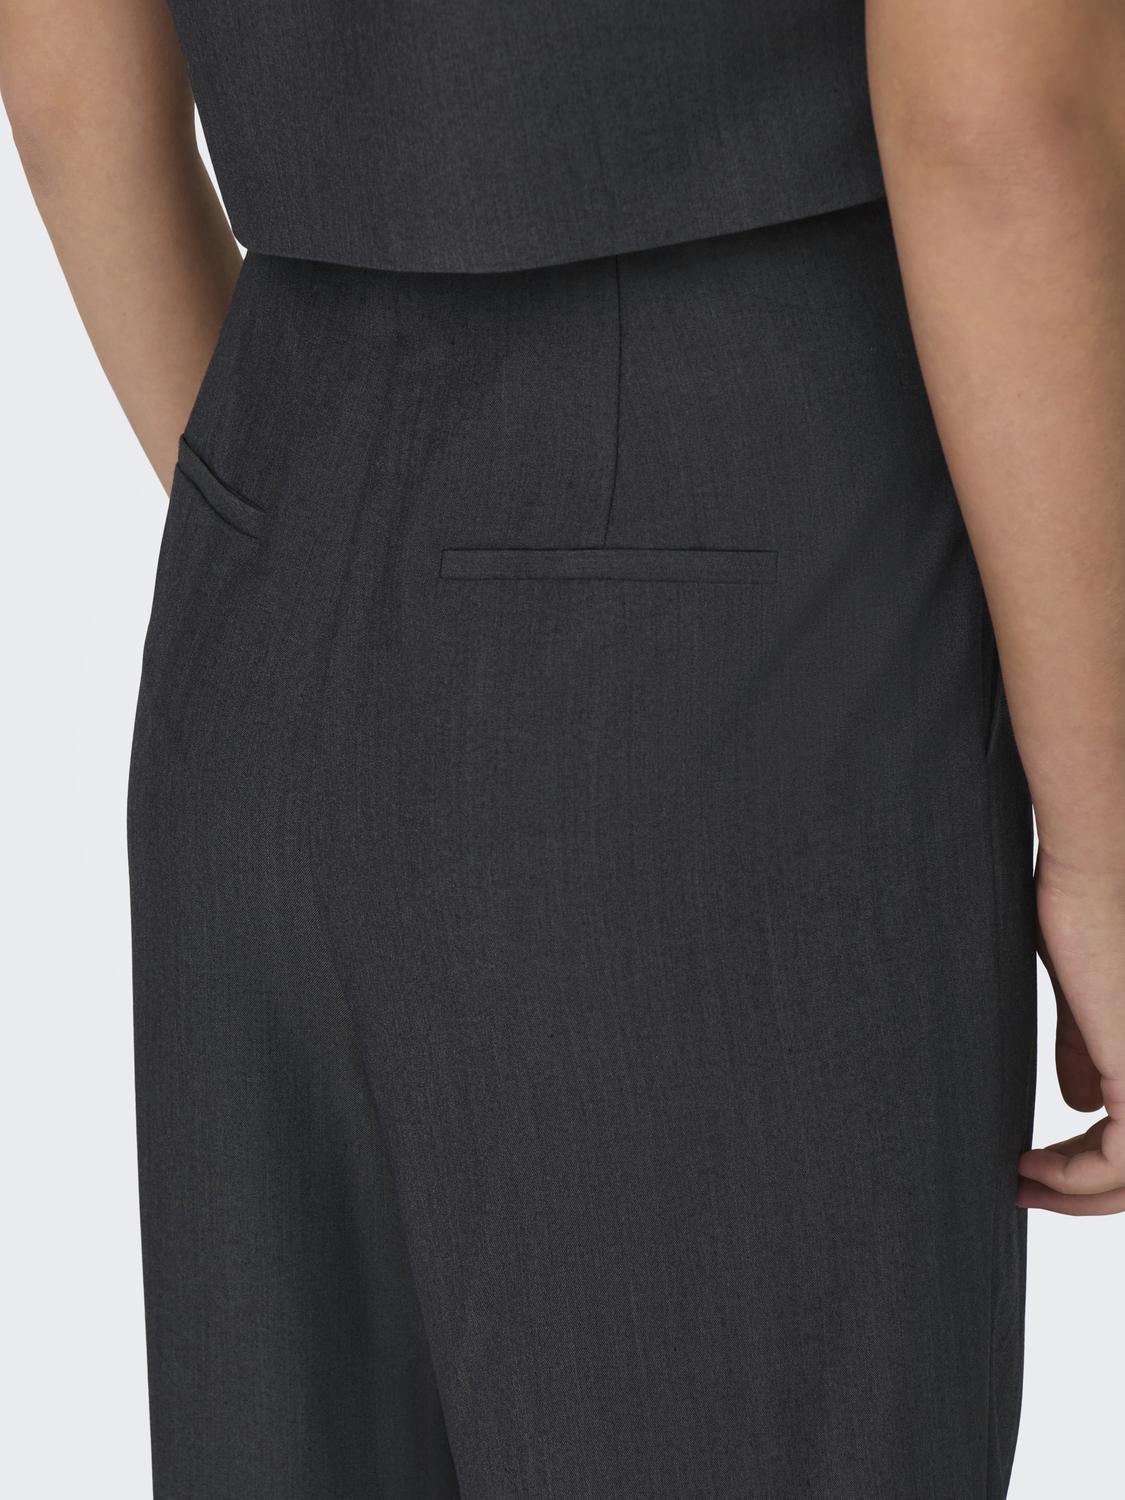 ONLY Classic wide pants -Dark Grey - 15303073